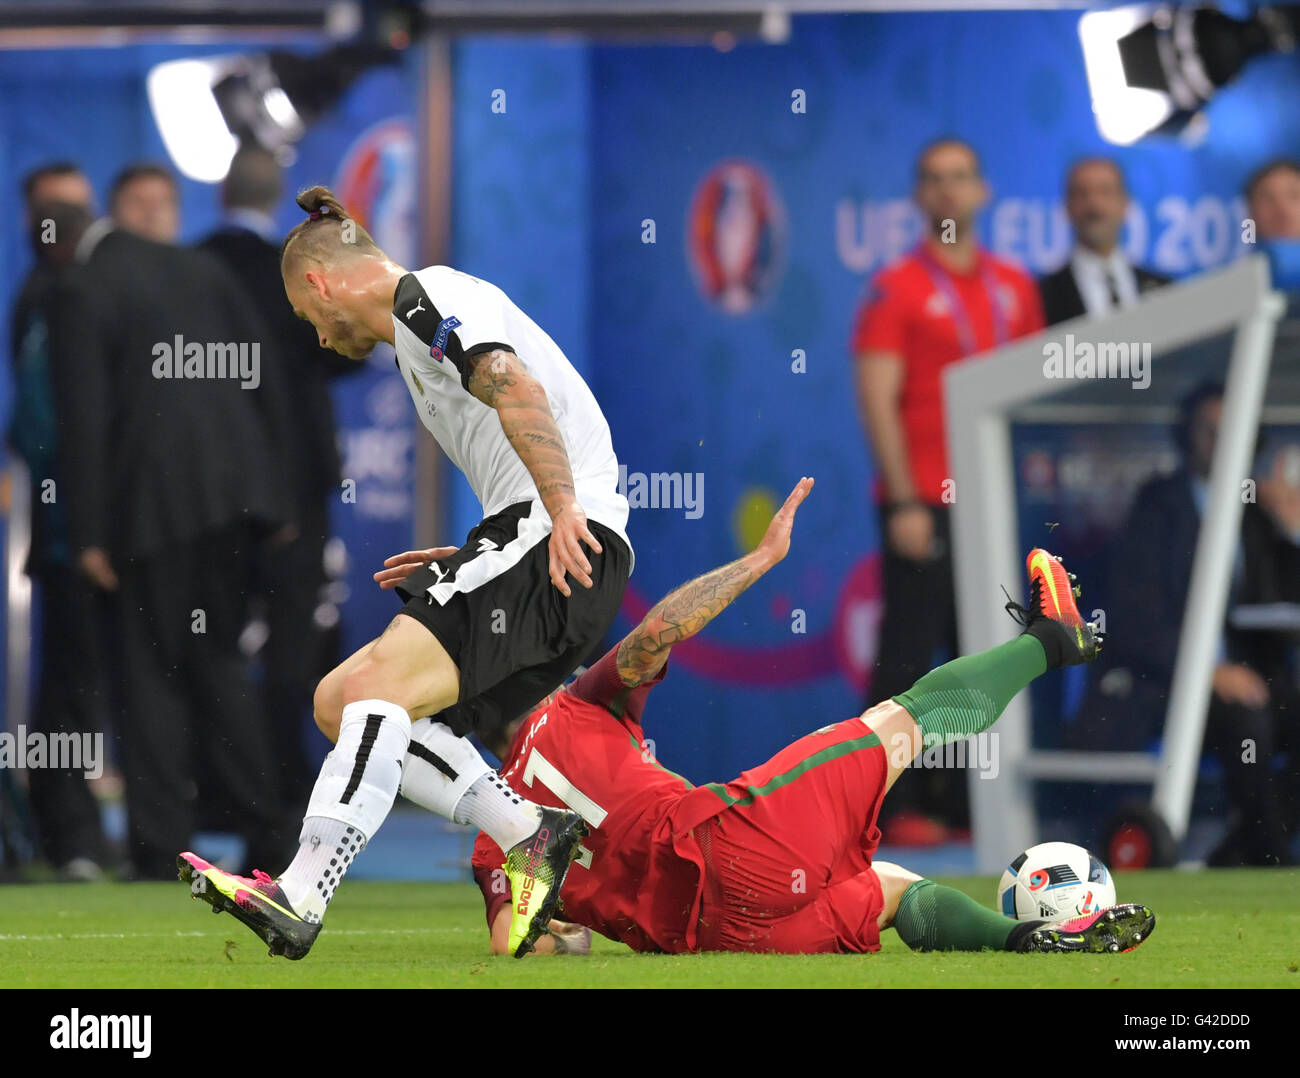 Paris, France. 18th June, 2016. Vieirinha (R) of Portugal and Marko Arnautovic of Austria vie for the ball during the UEFA Euro 2016 Group F soccer match Portugal vs. Austria at the Parc des Princes stadium in Paris, France, 18 June 2016. Photo: Peter Kneffel/dpa/Alamy Live News Stock Photo